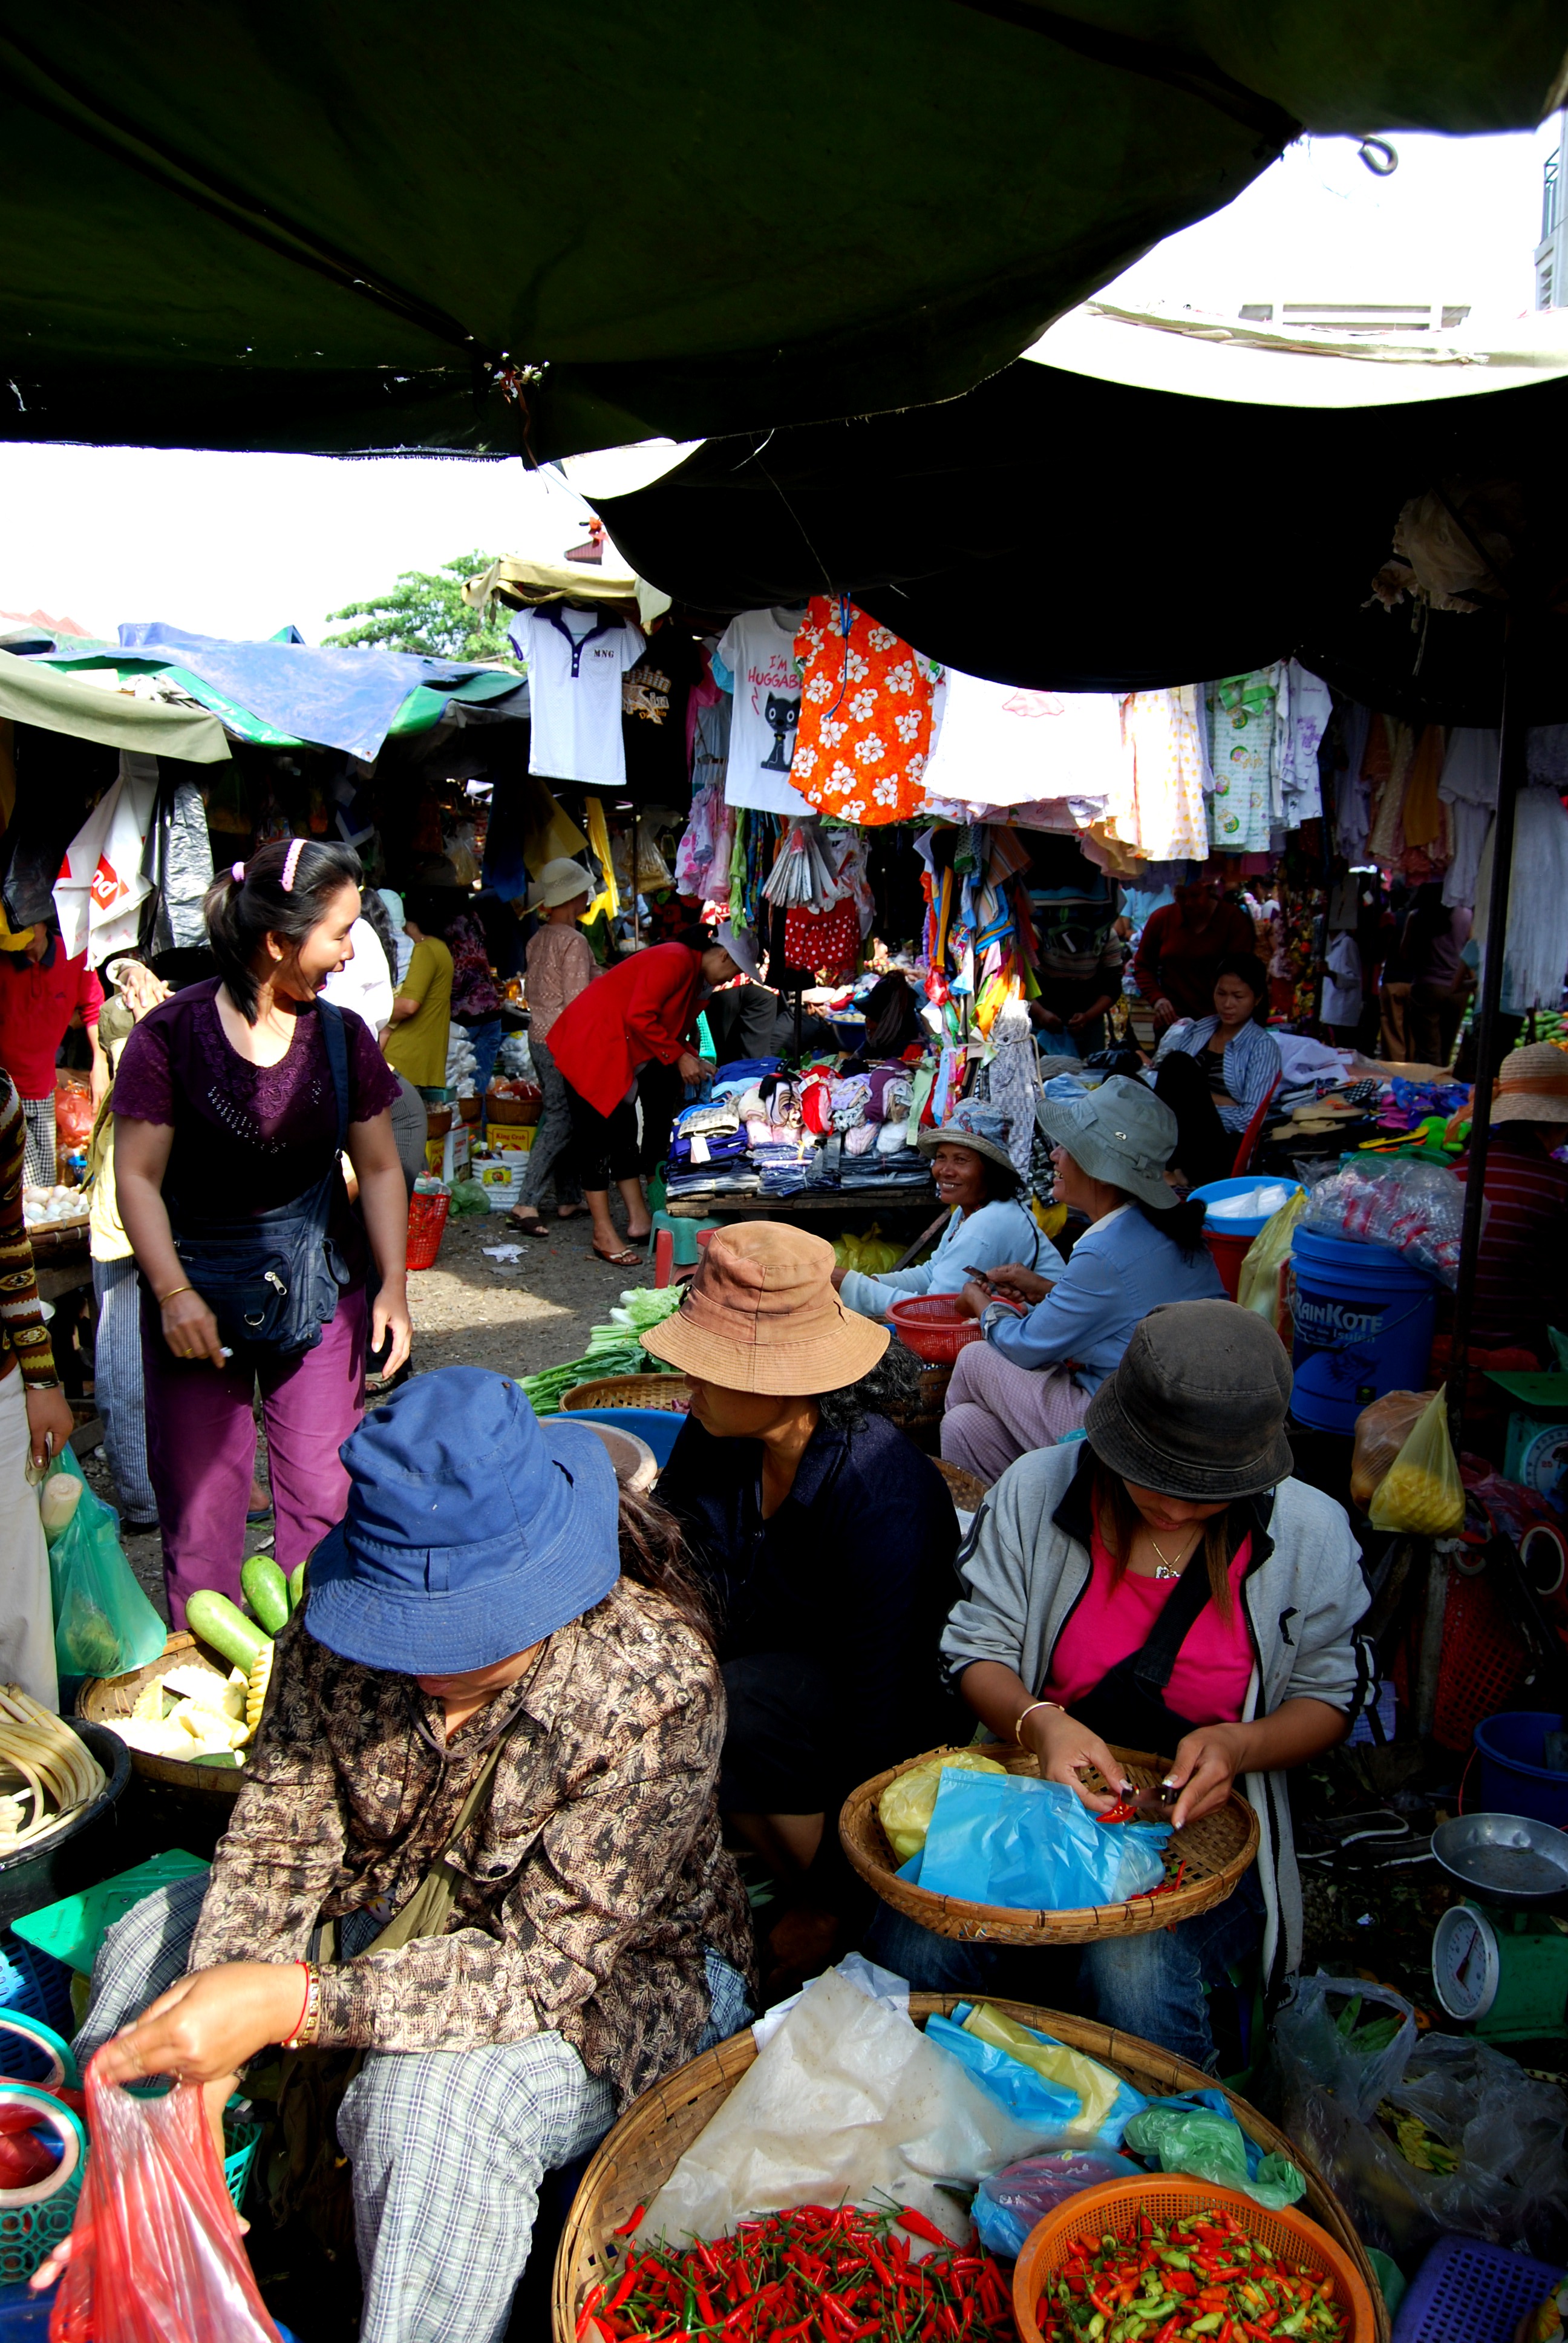 Cambodian Food Market is a Colourful, Noisy and Smelly Asault on the Senses